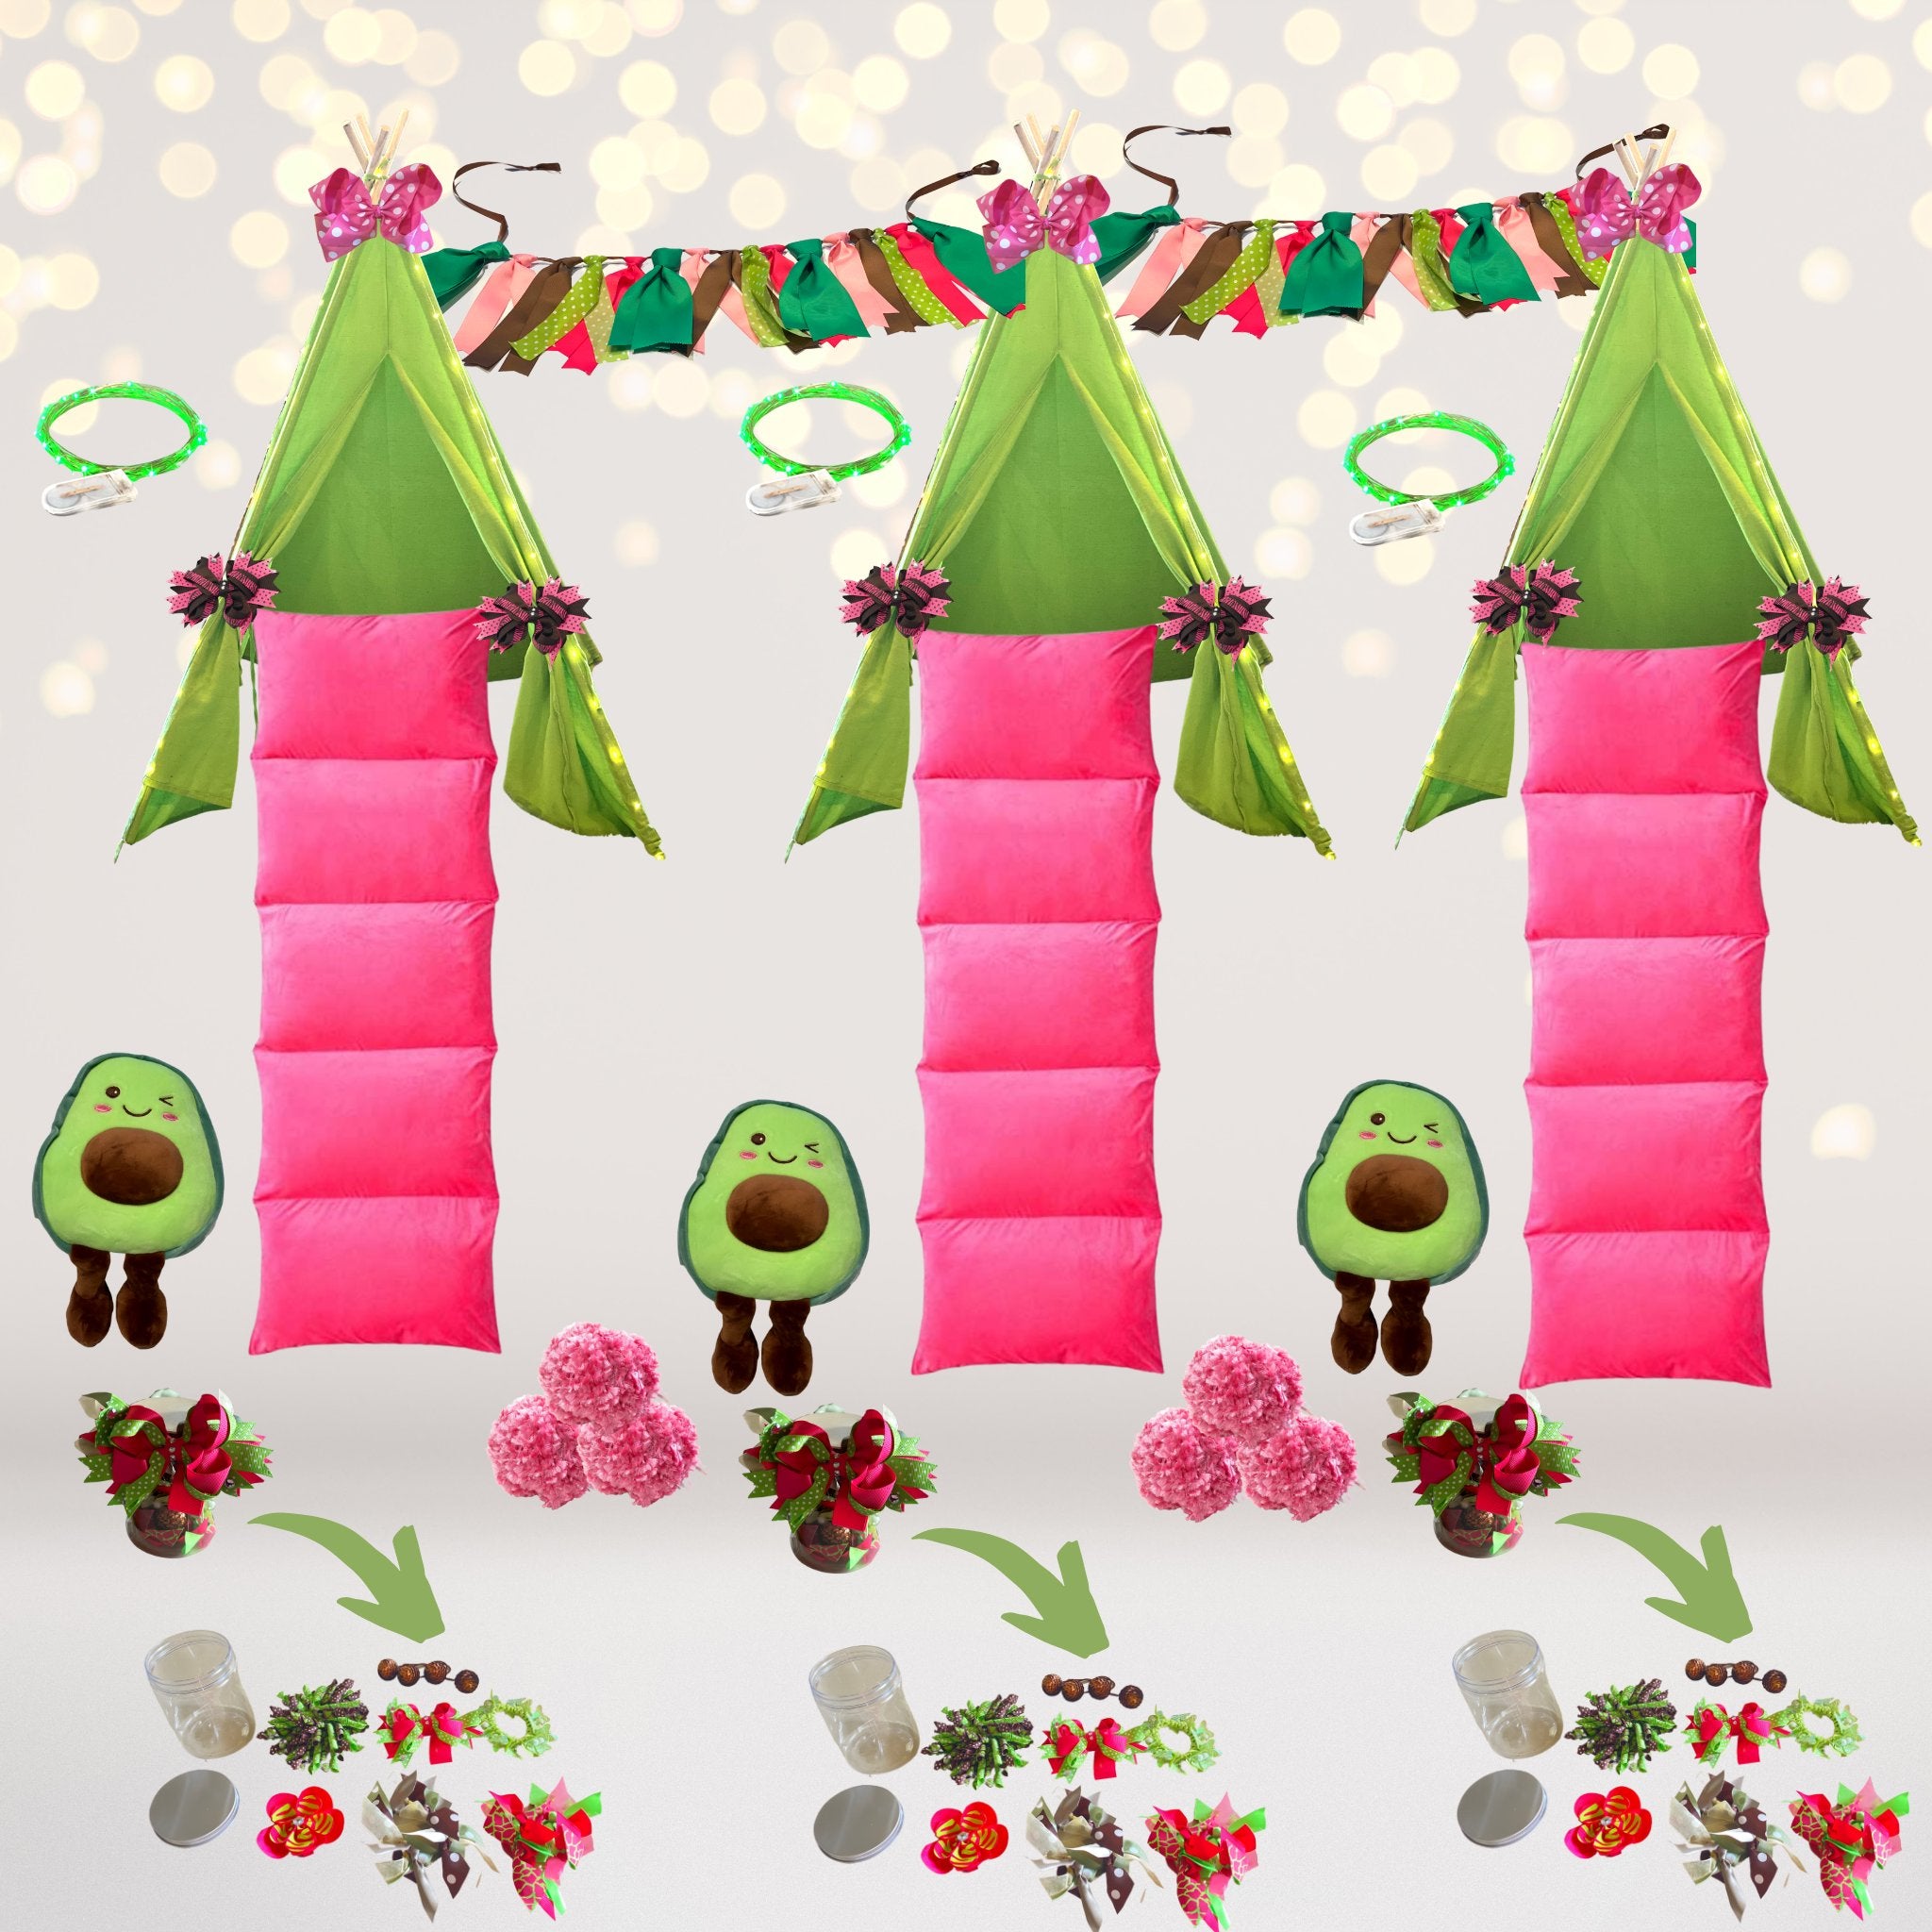 Sleepover Tent Party Bundles, Sleepover Birthday Party Supplies - Chicky Chicky Bling Bling, LLC